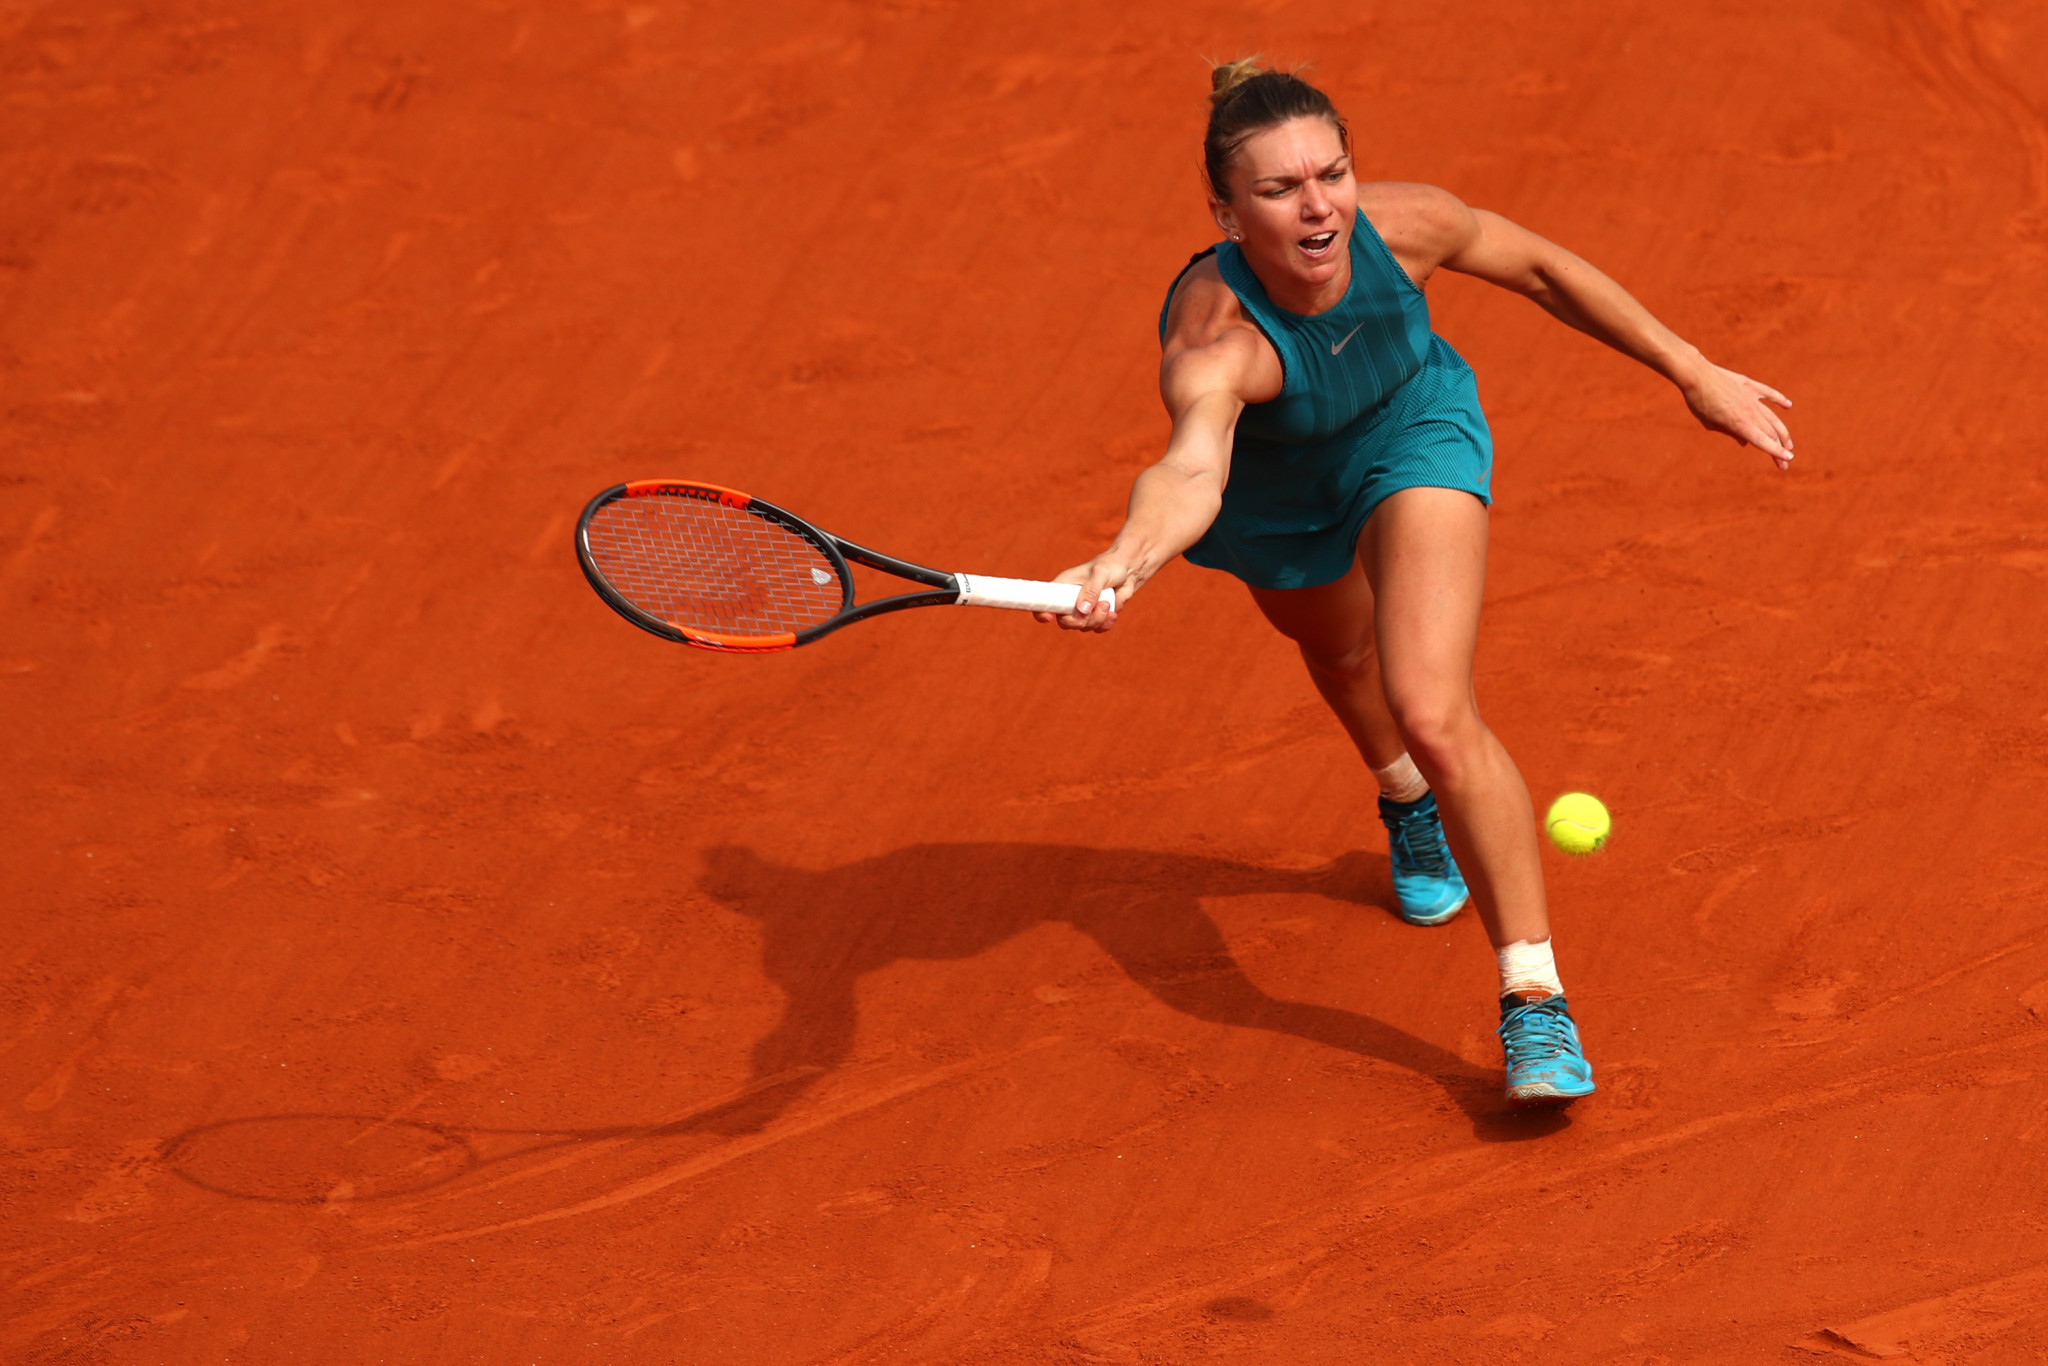 Halep clinches first Grand Slam title with three-set victory over Stephens at French Open